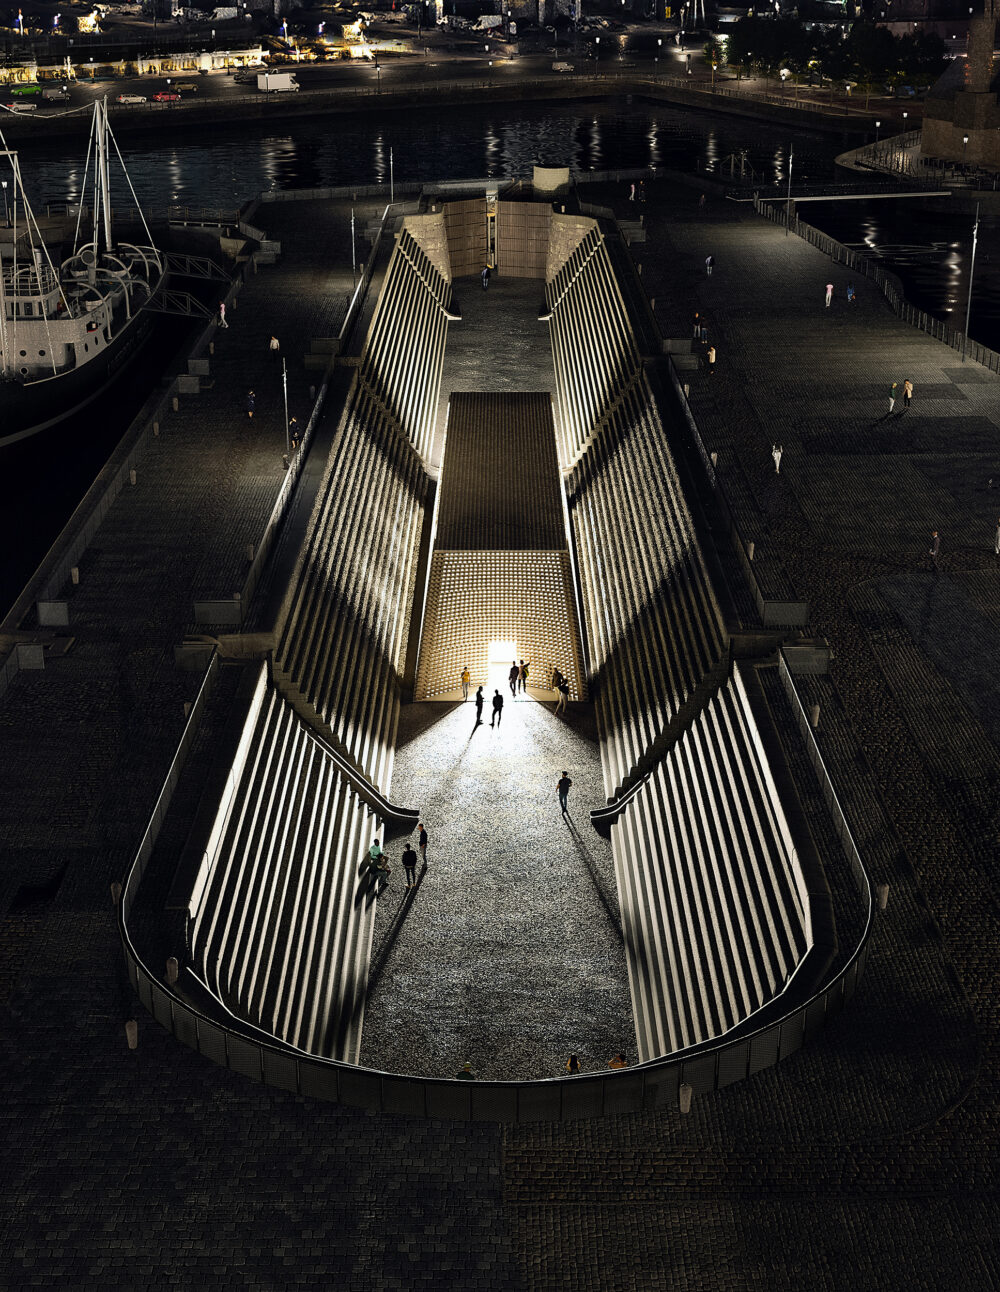 Night-time view of the South Dry Dock (c) Asif Khan Studio